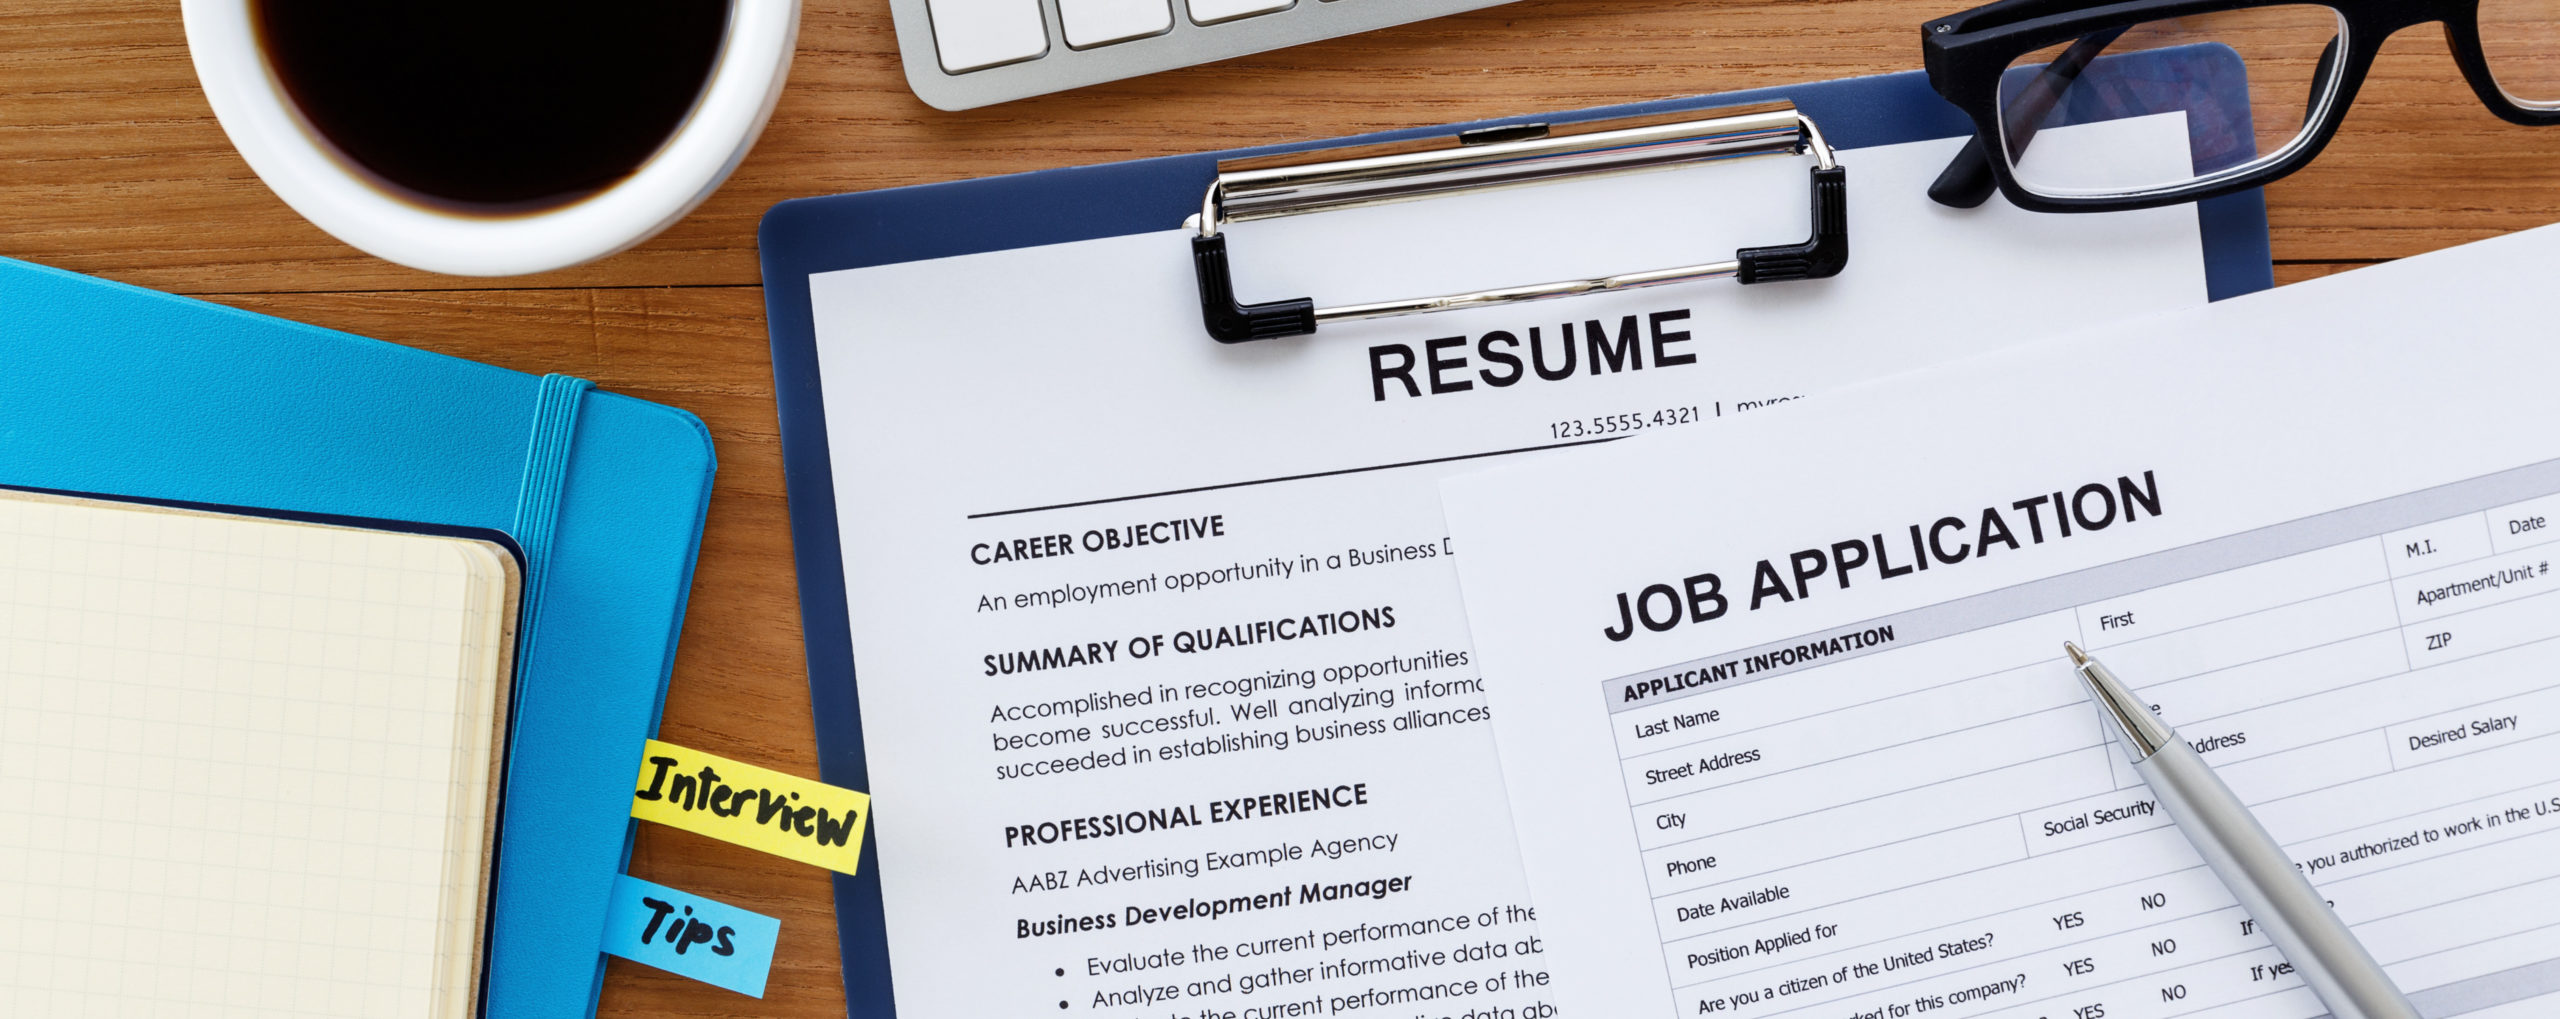 The Hunt Is On: Tips For Your Job Search.